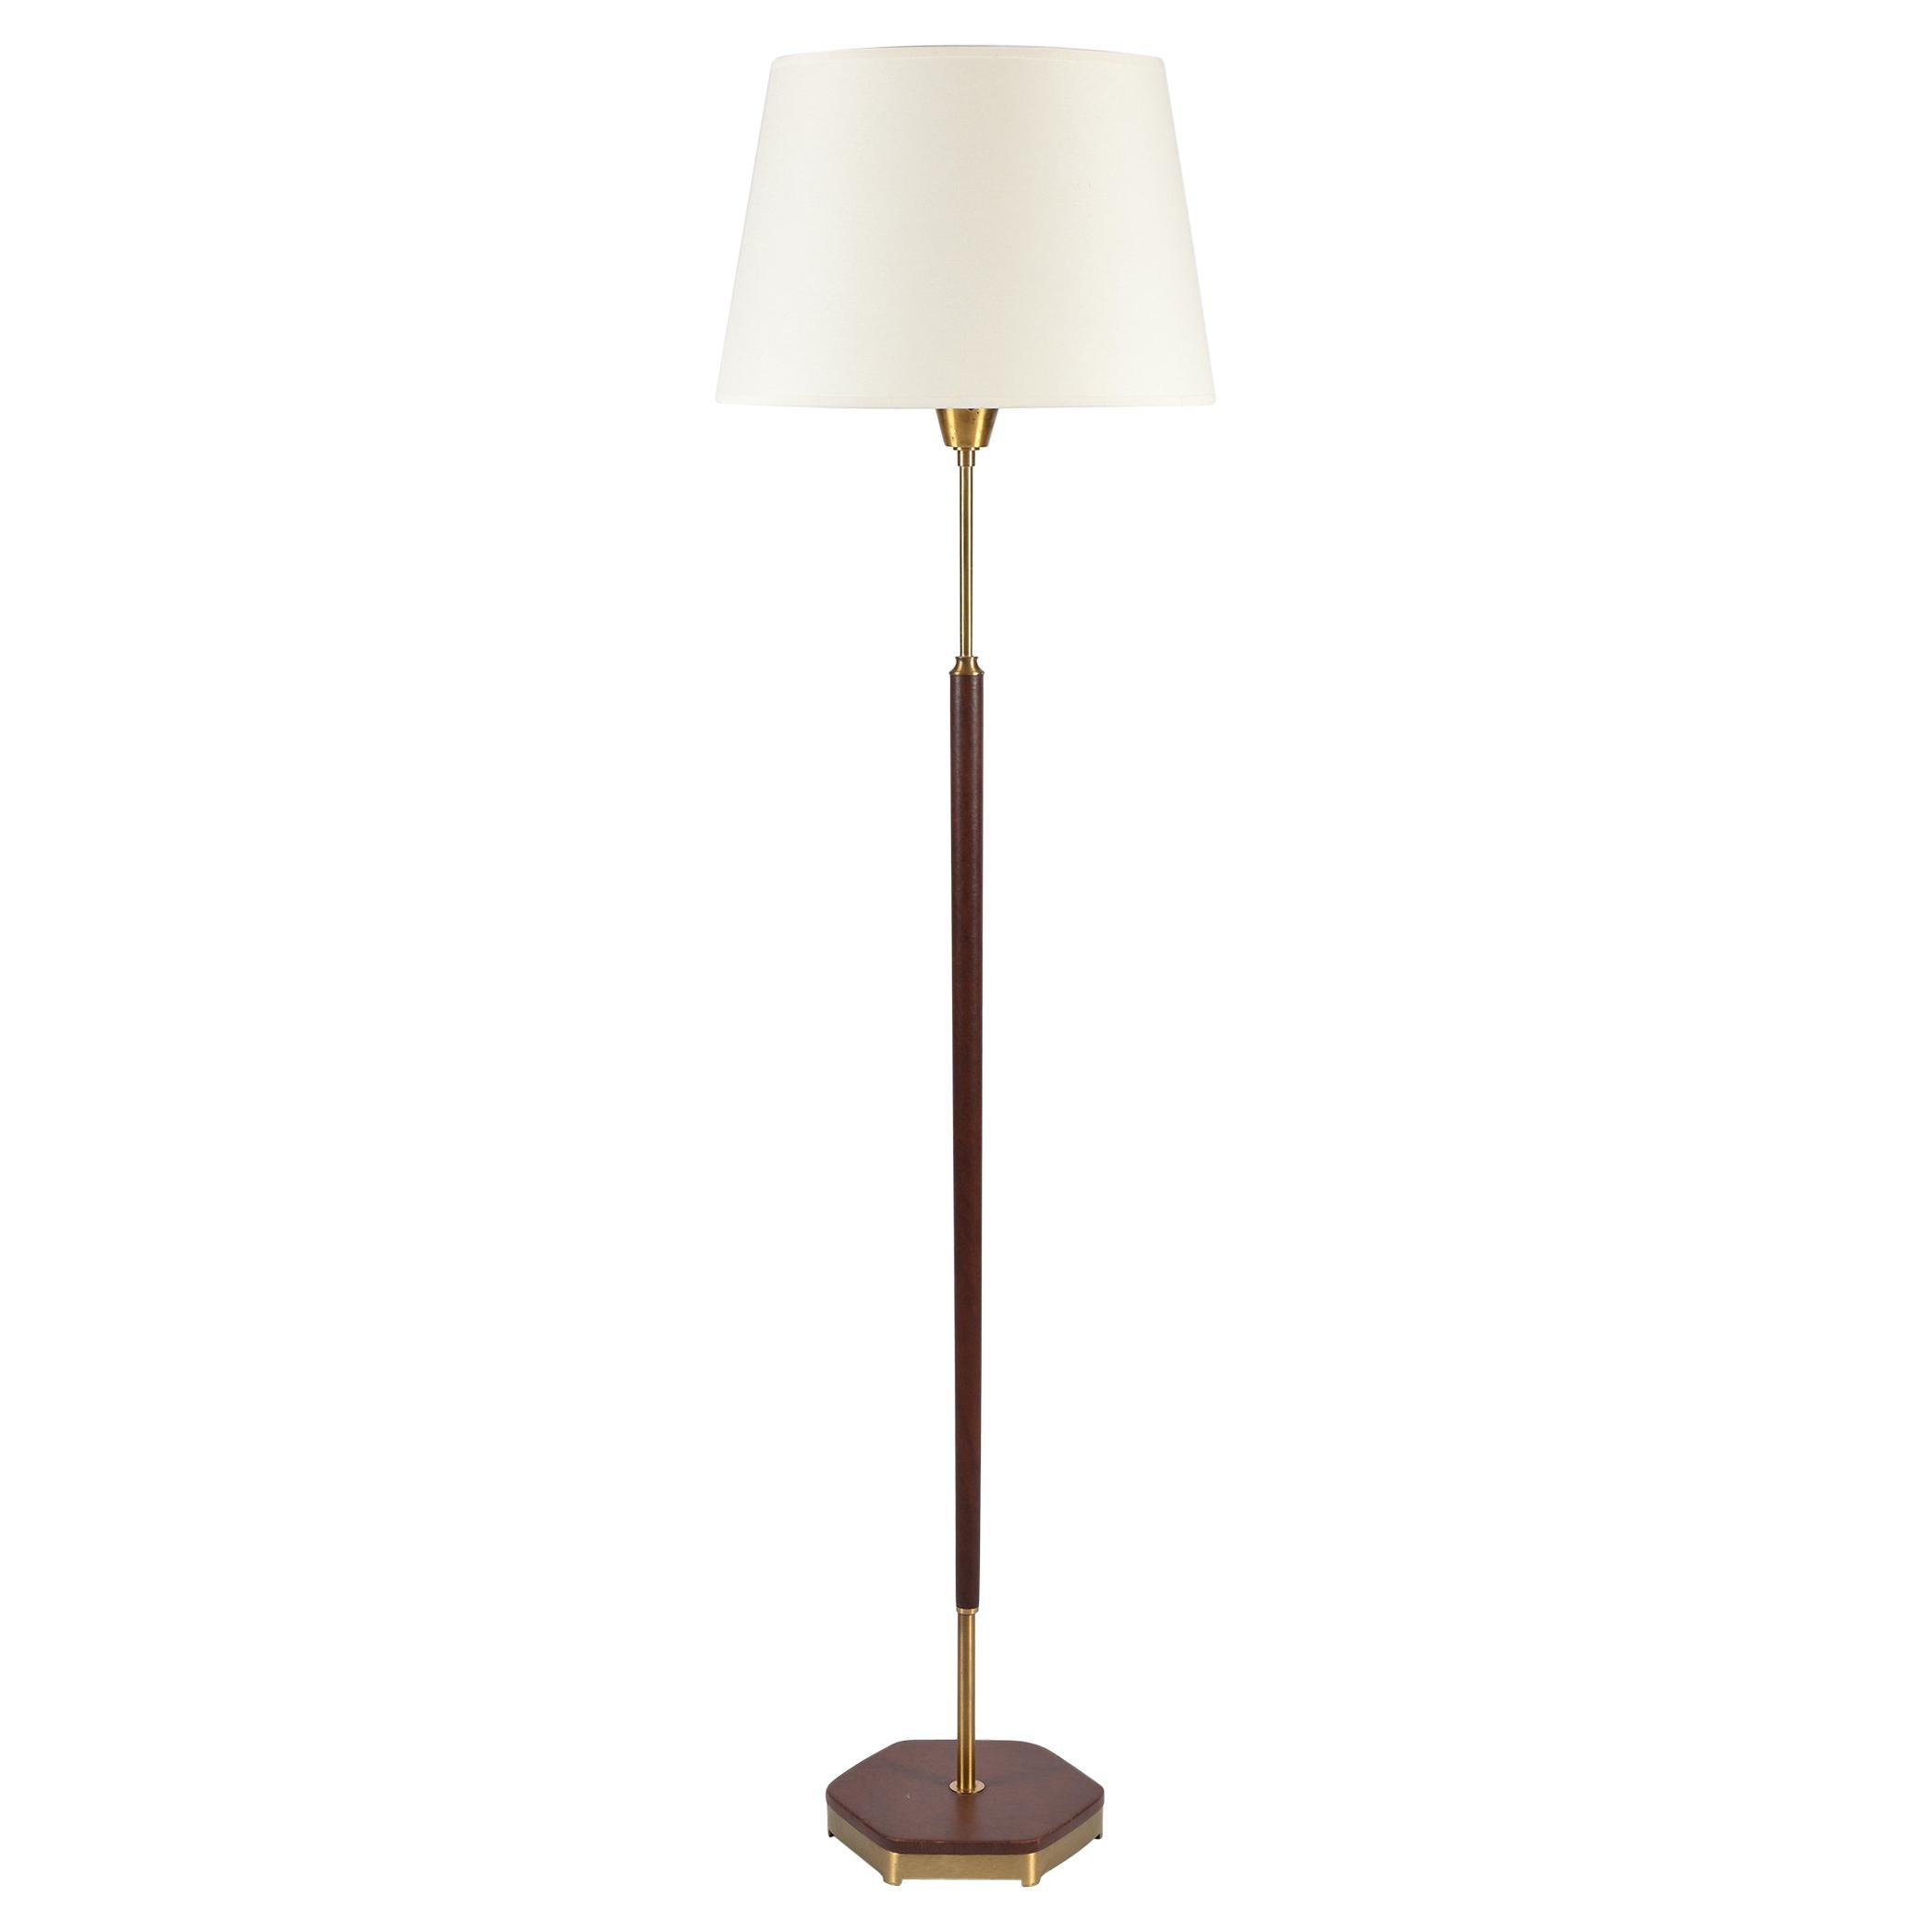 Midcentury Brass and Brown Leather Floor Lamp